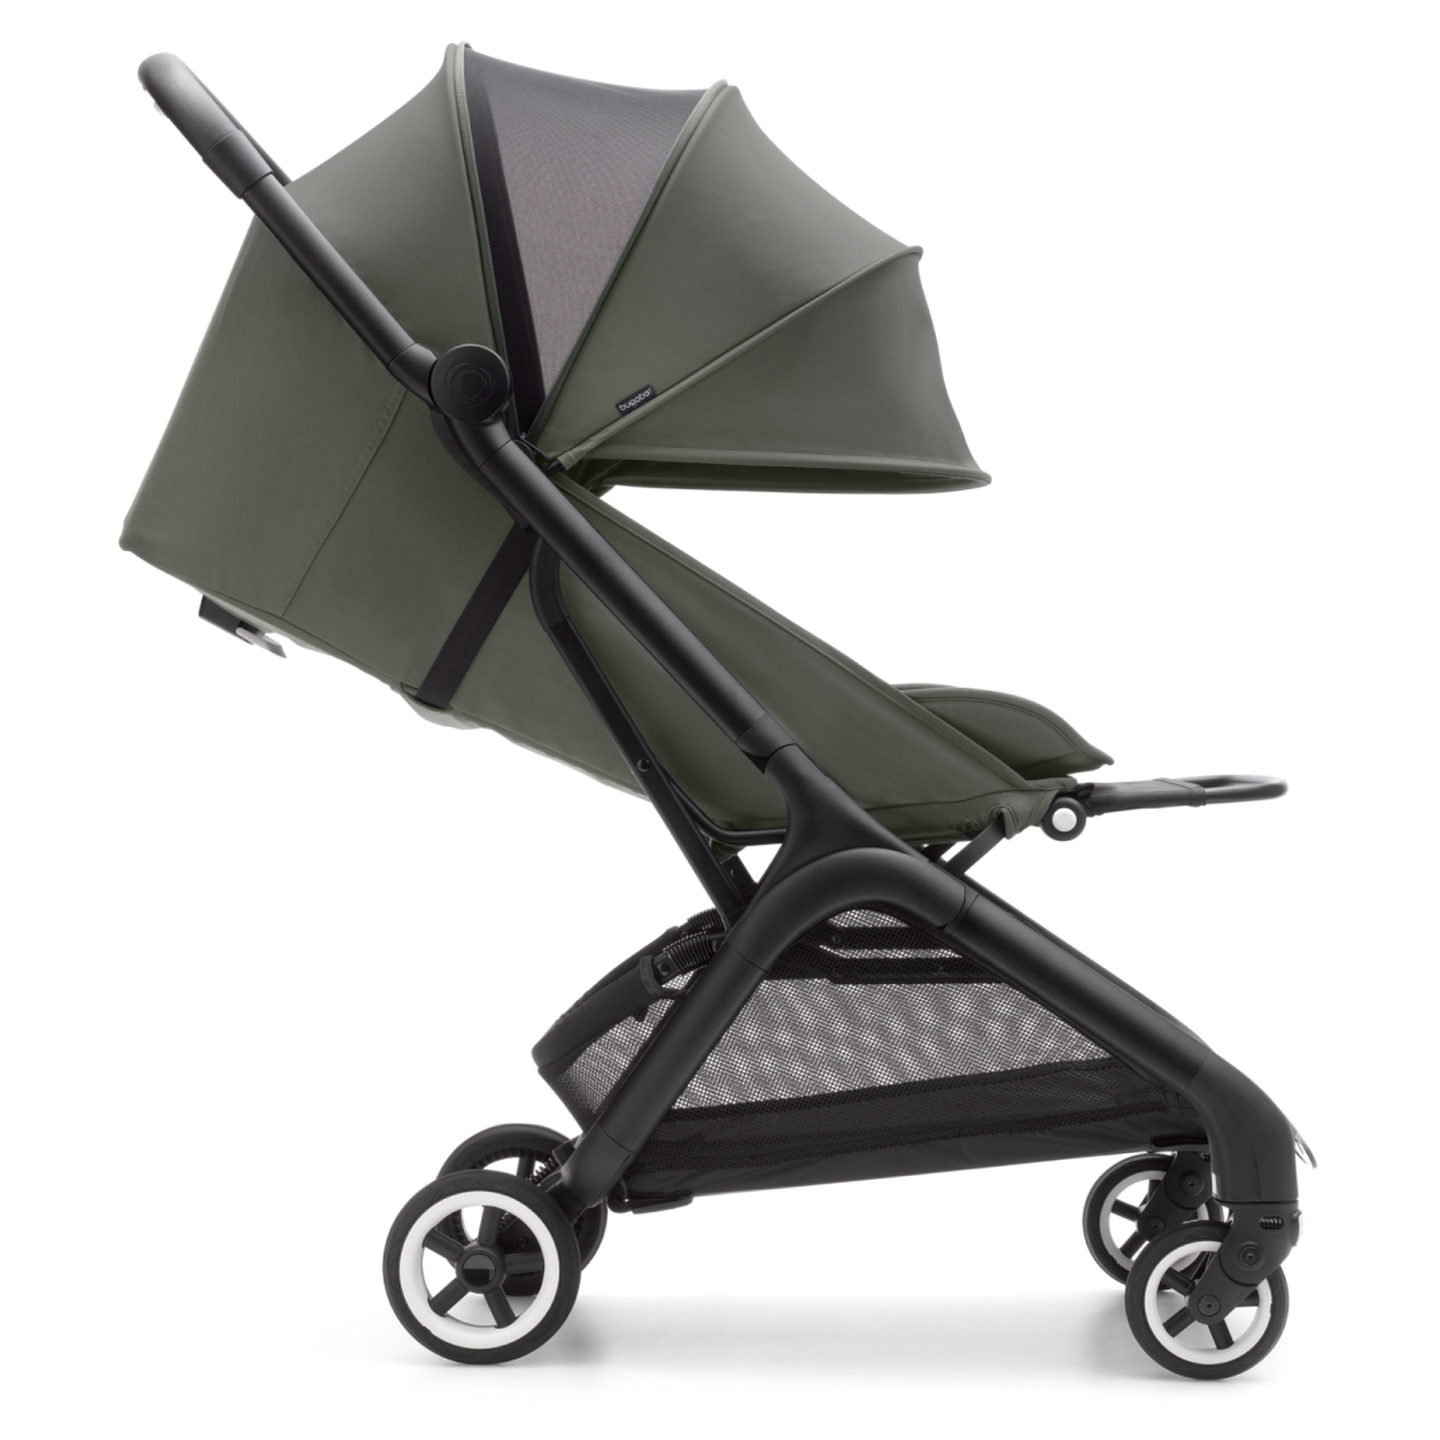 Sideway view of a Bugaboo Butterfly compact travel pram with a Forest Green canopy fully extended.